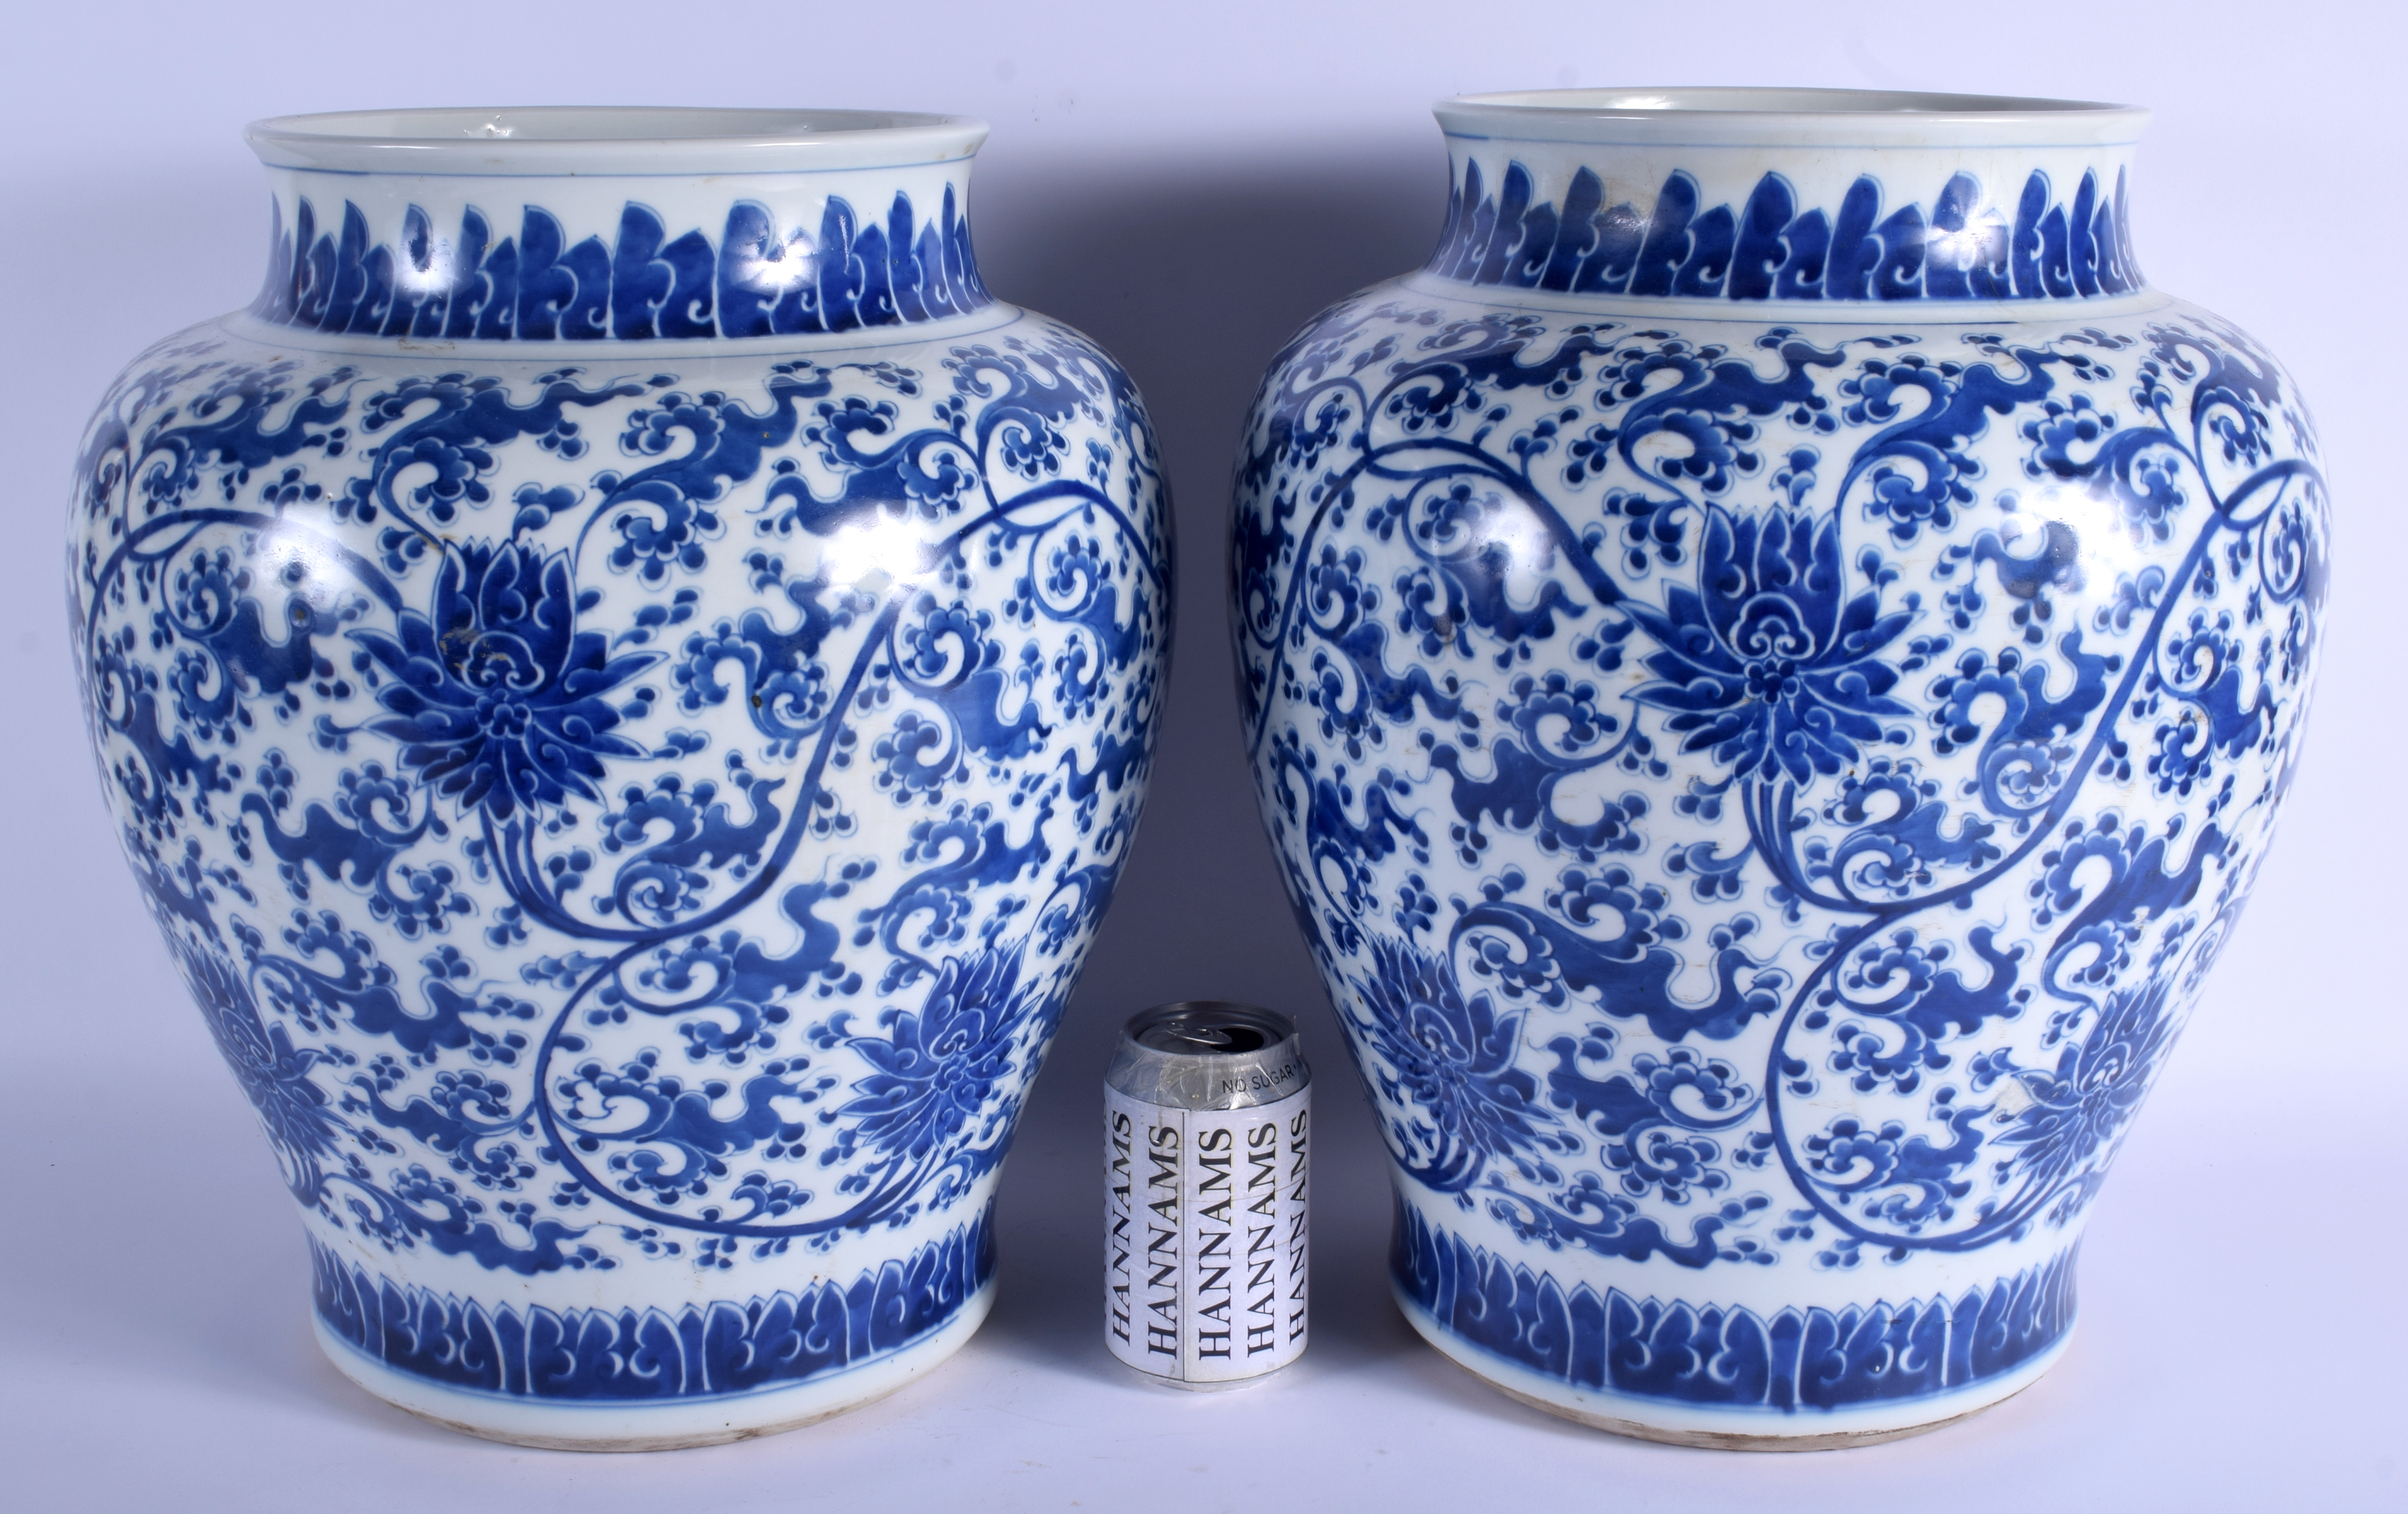 A LARGE PAIR OF CHINESE BLUE AND WHITE PORCELAIN BALUSTER VASES probably Mid Qing Dynasty, painted